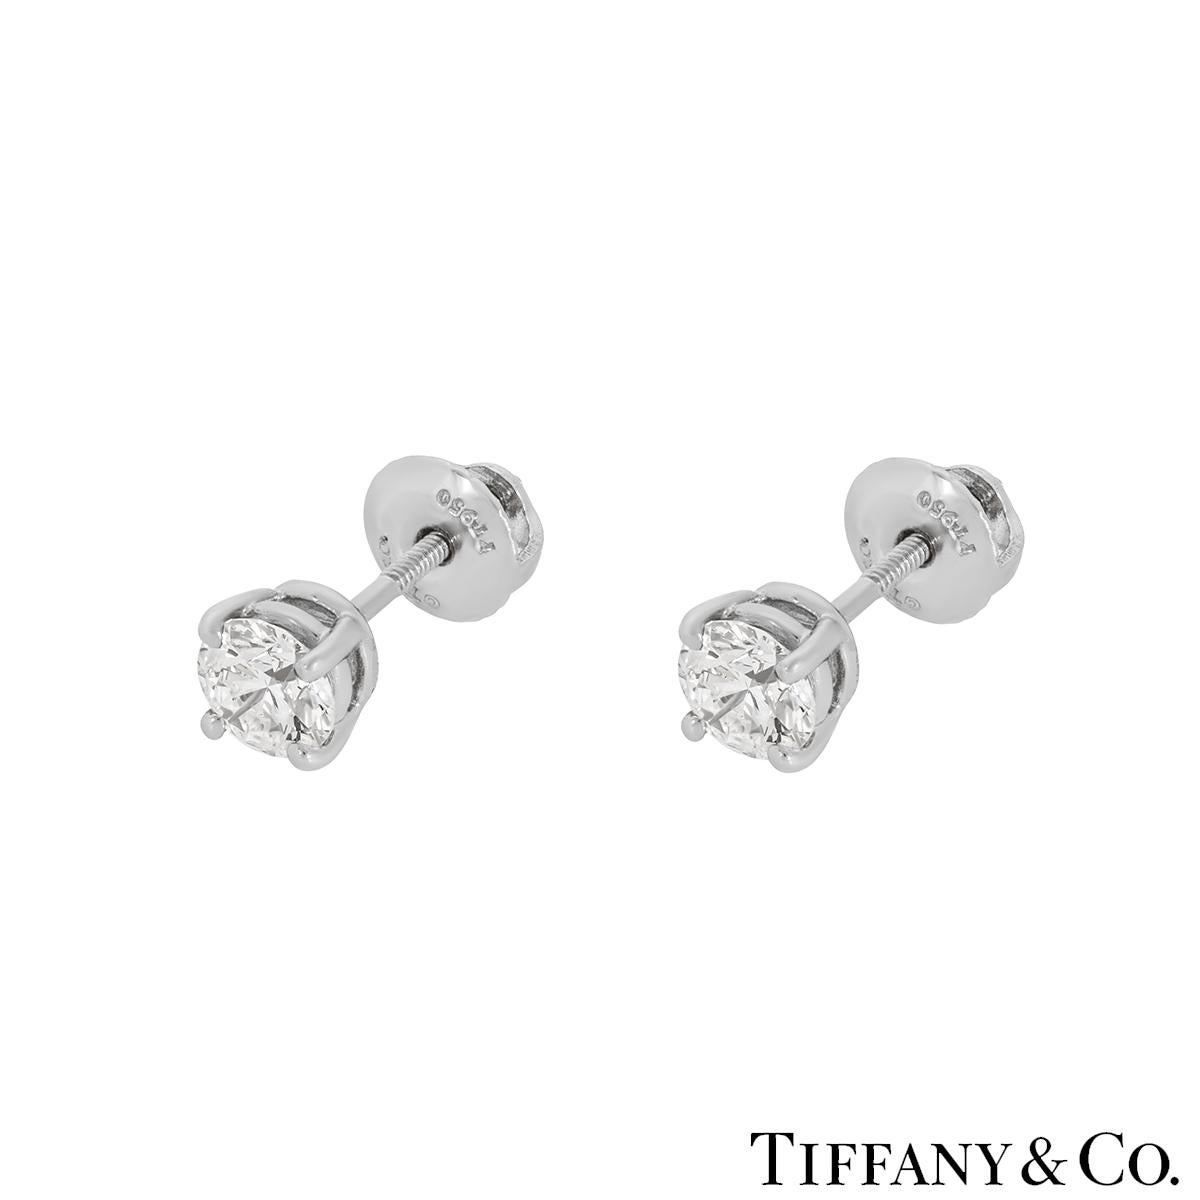 A lovely pair of platinum diamond earrings from Tiffany & Co. The four prong solitaire studs are meticulously matched and have an approximate total weight of 0.80ct, G colour and VS1 clarity. They finish with threaded posts and screw back fittings